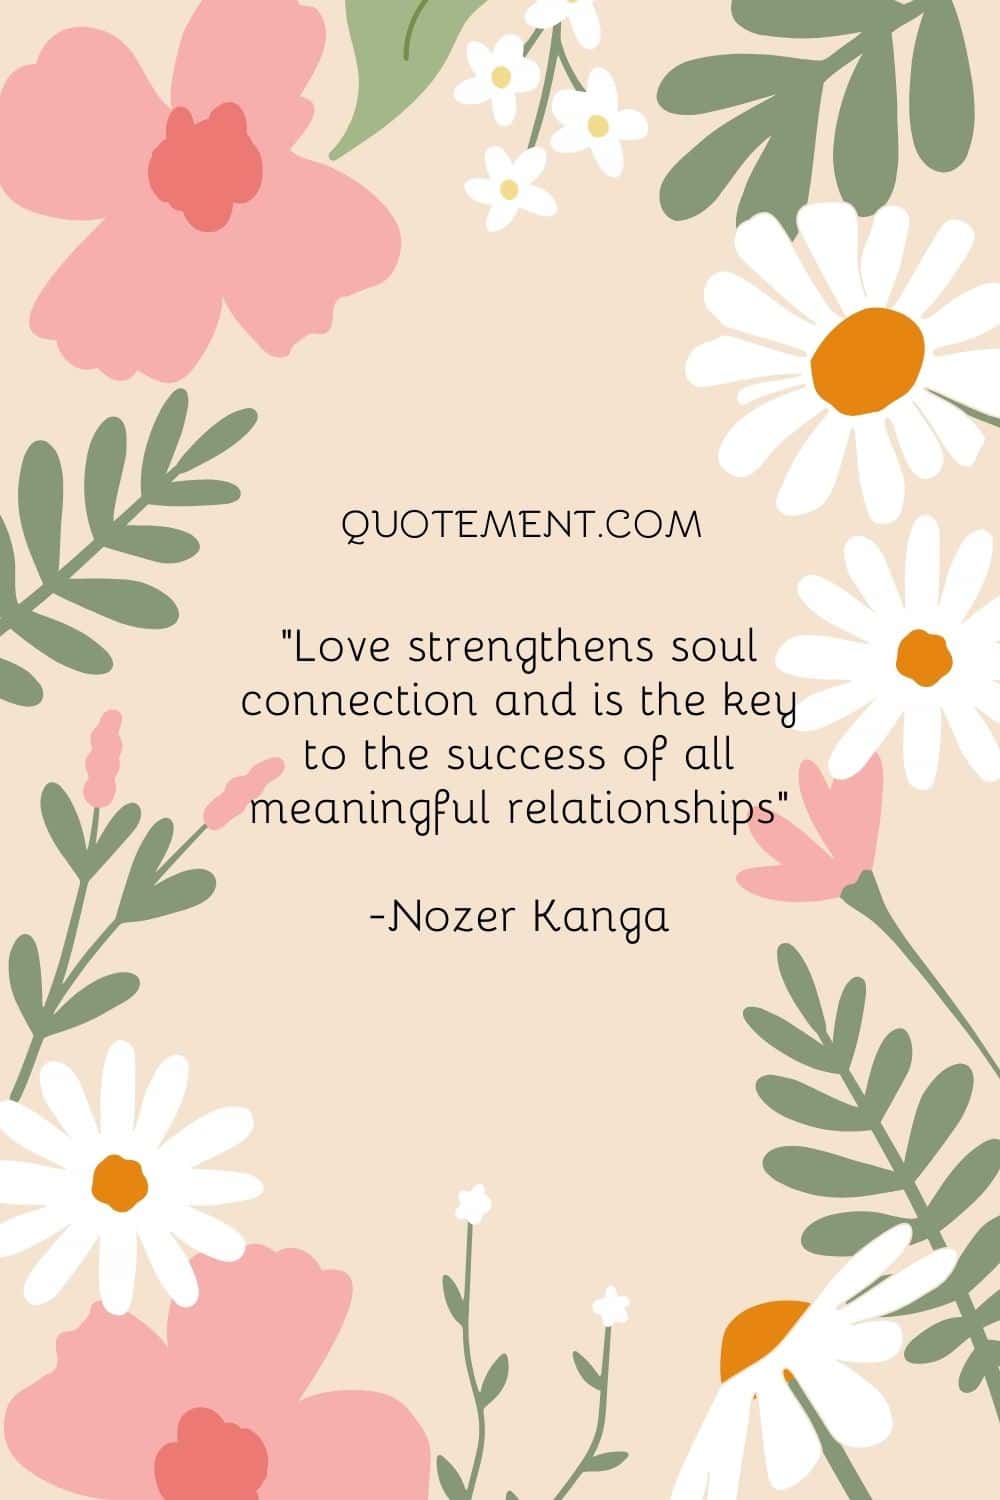 Love strengthens soul connection and is the key to the success of all meaningful relationships